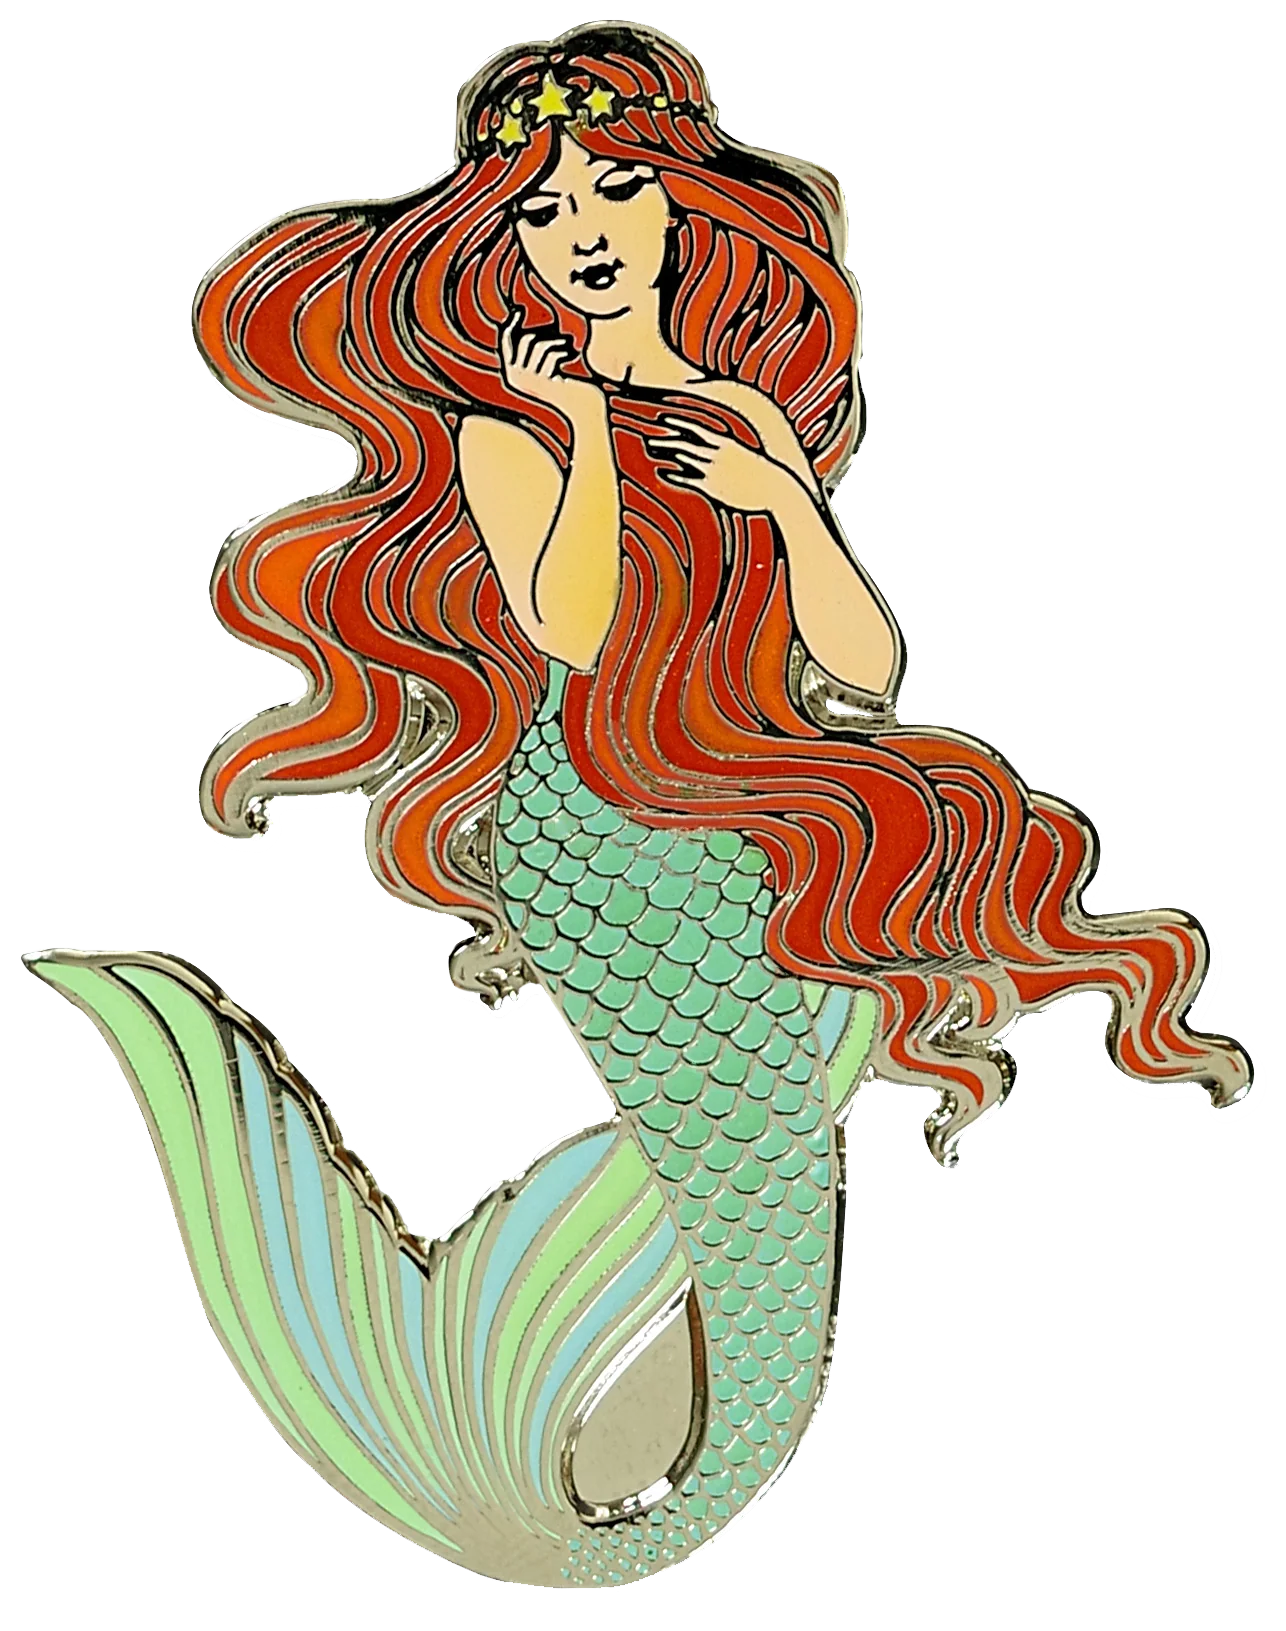 fair skinned mermaid with red hair gold crown, and a green tail